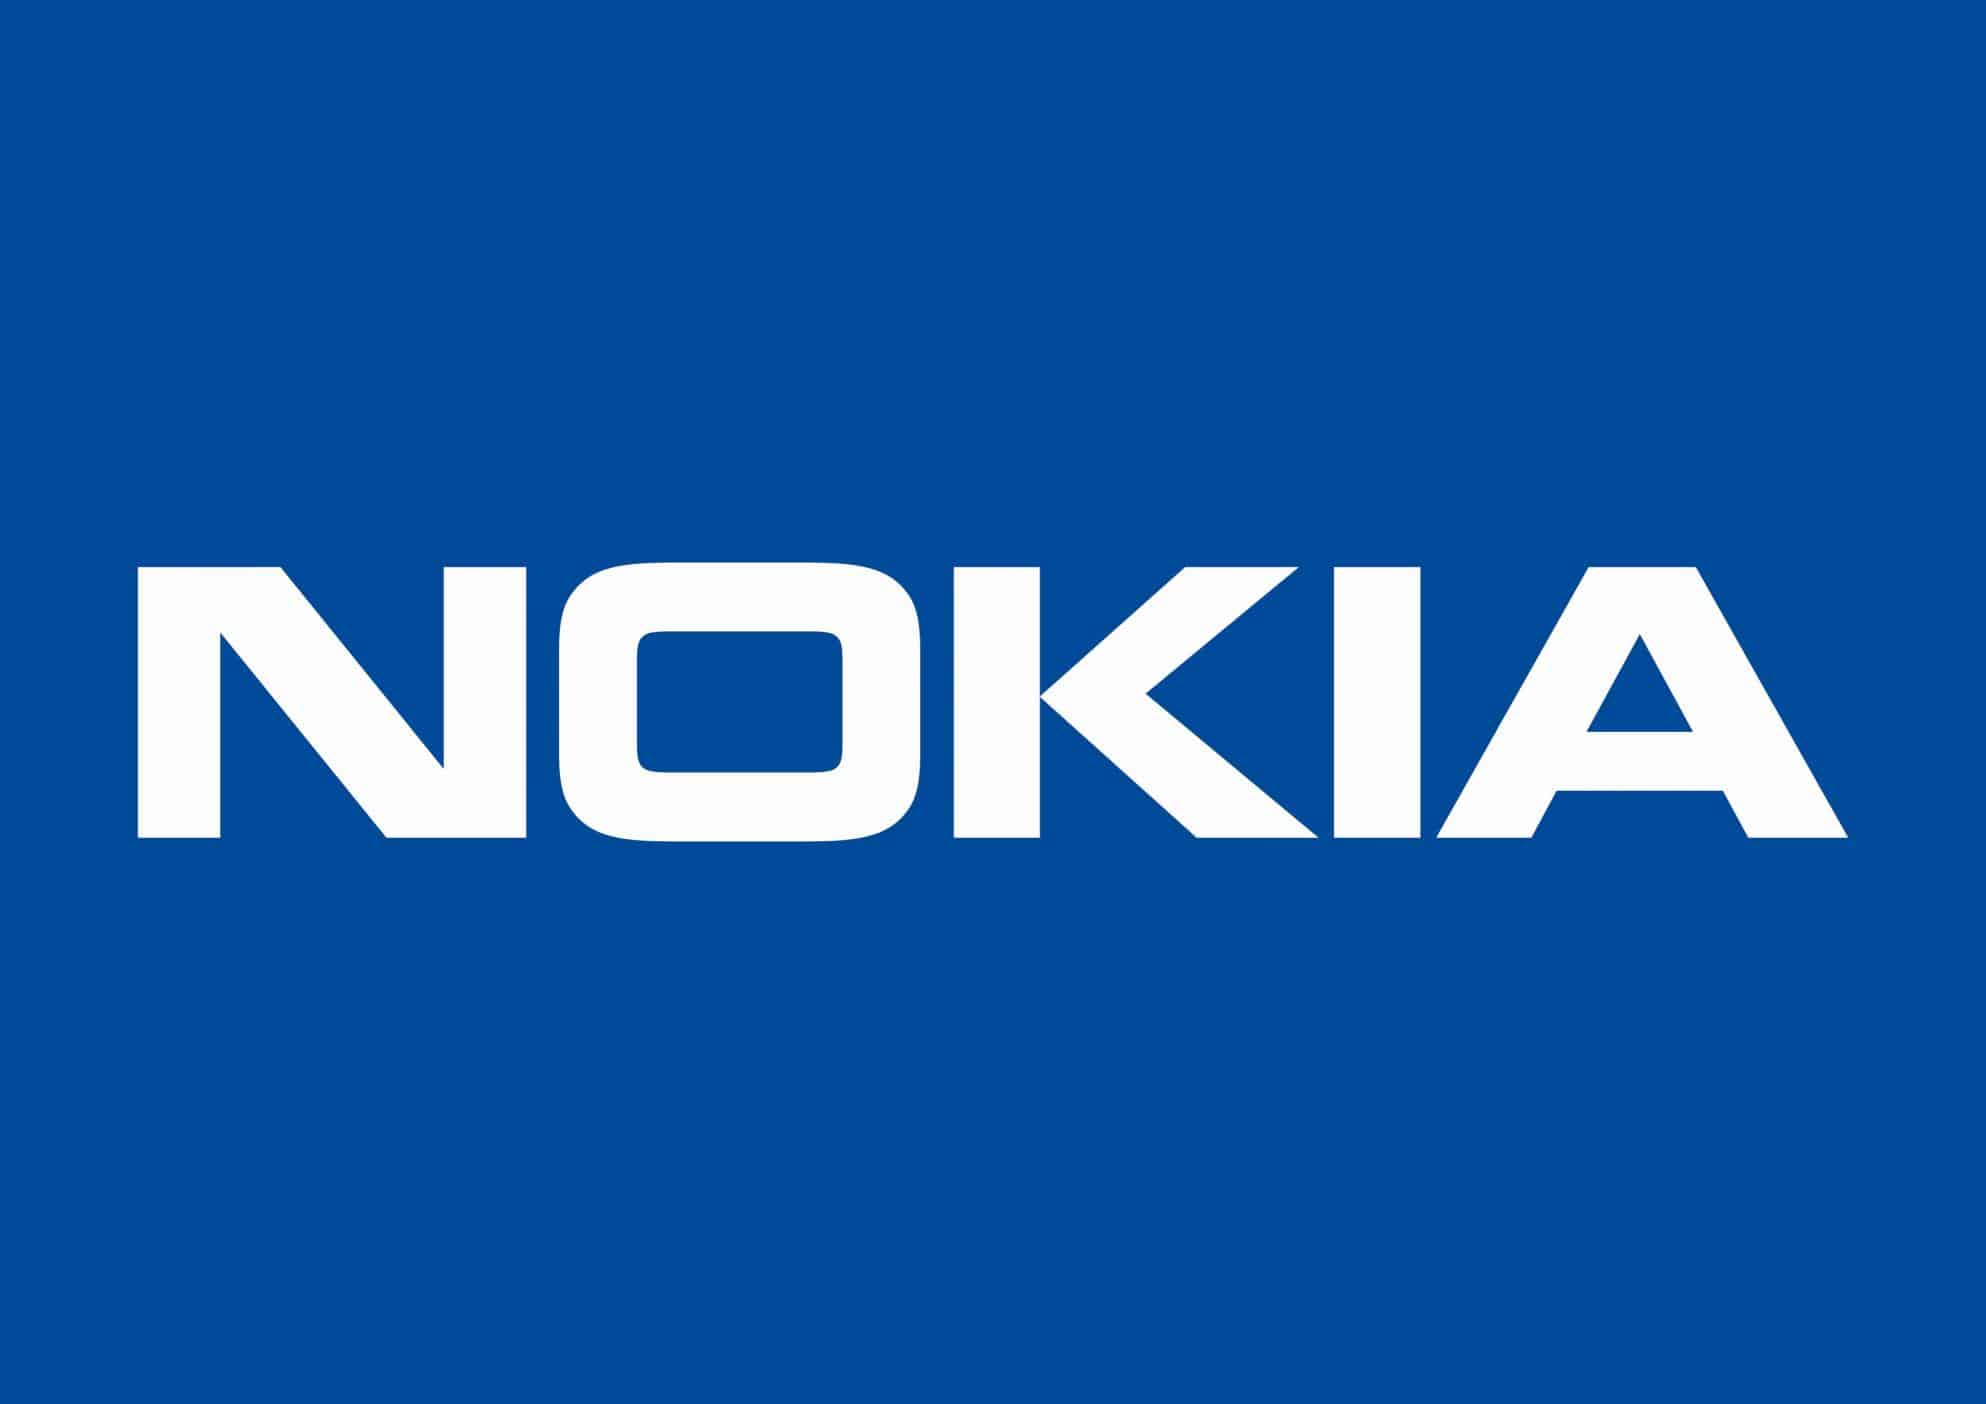 Nokia to resize and reset costs to become more profitable